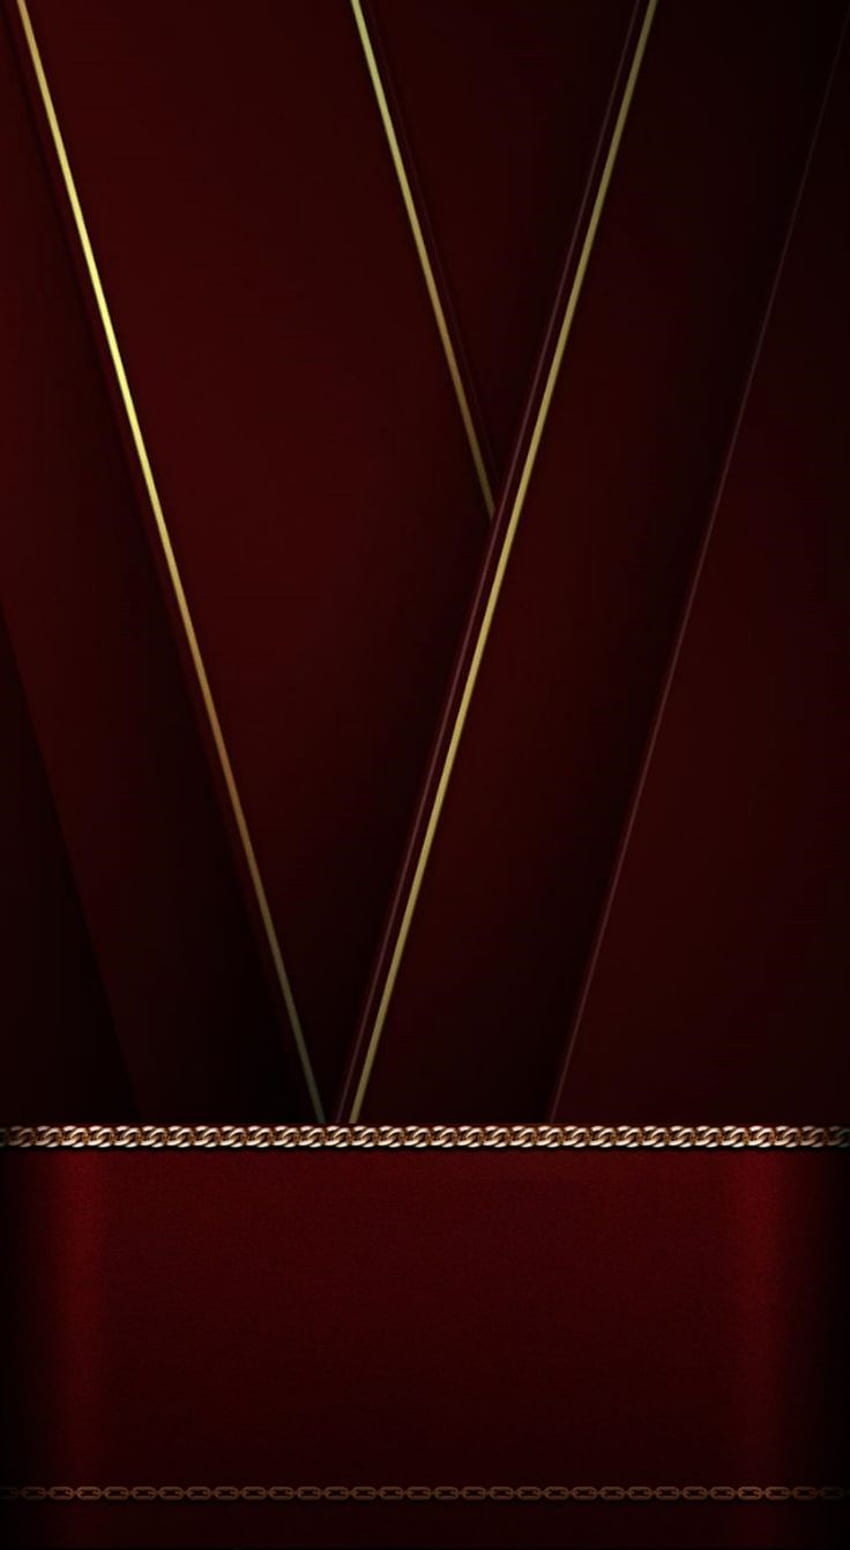 Burgundy with Gold Trim . Phone design, iPhone background , Iconic , Burgundy Textured HD phone wallpaper